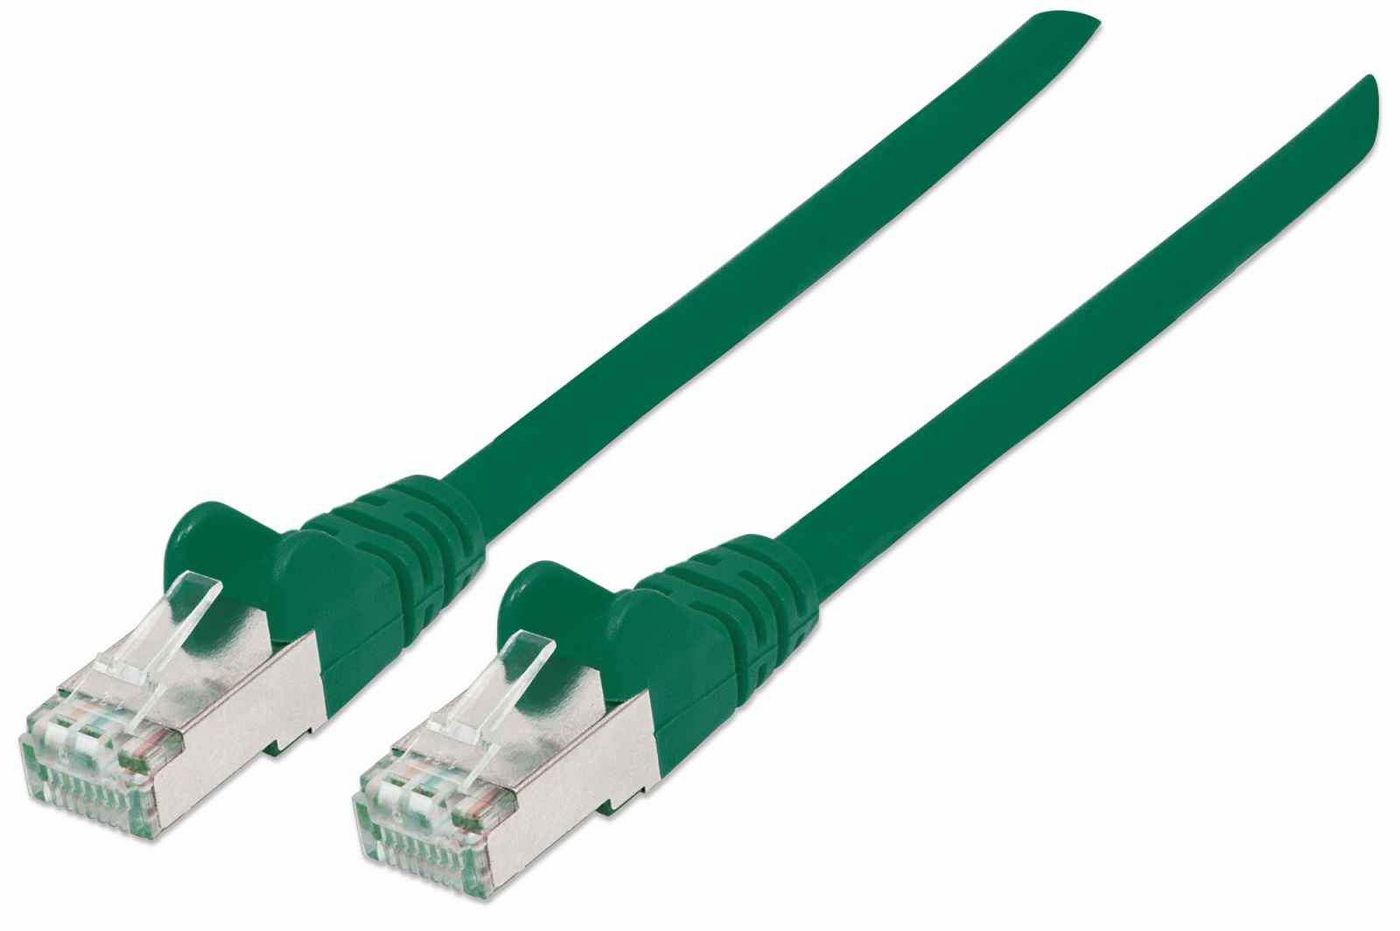 Intellinet 740784 High Performance Network Cable 